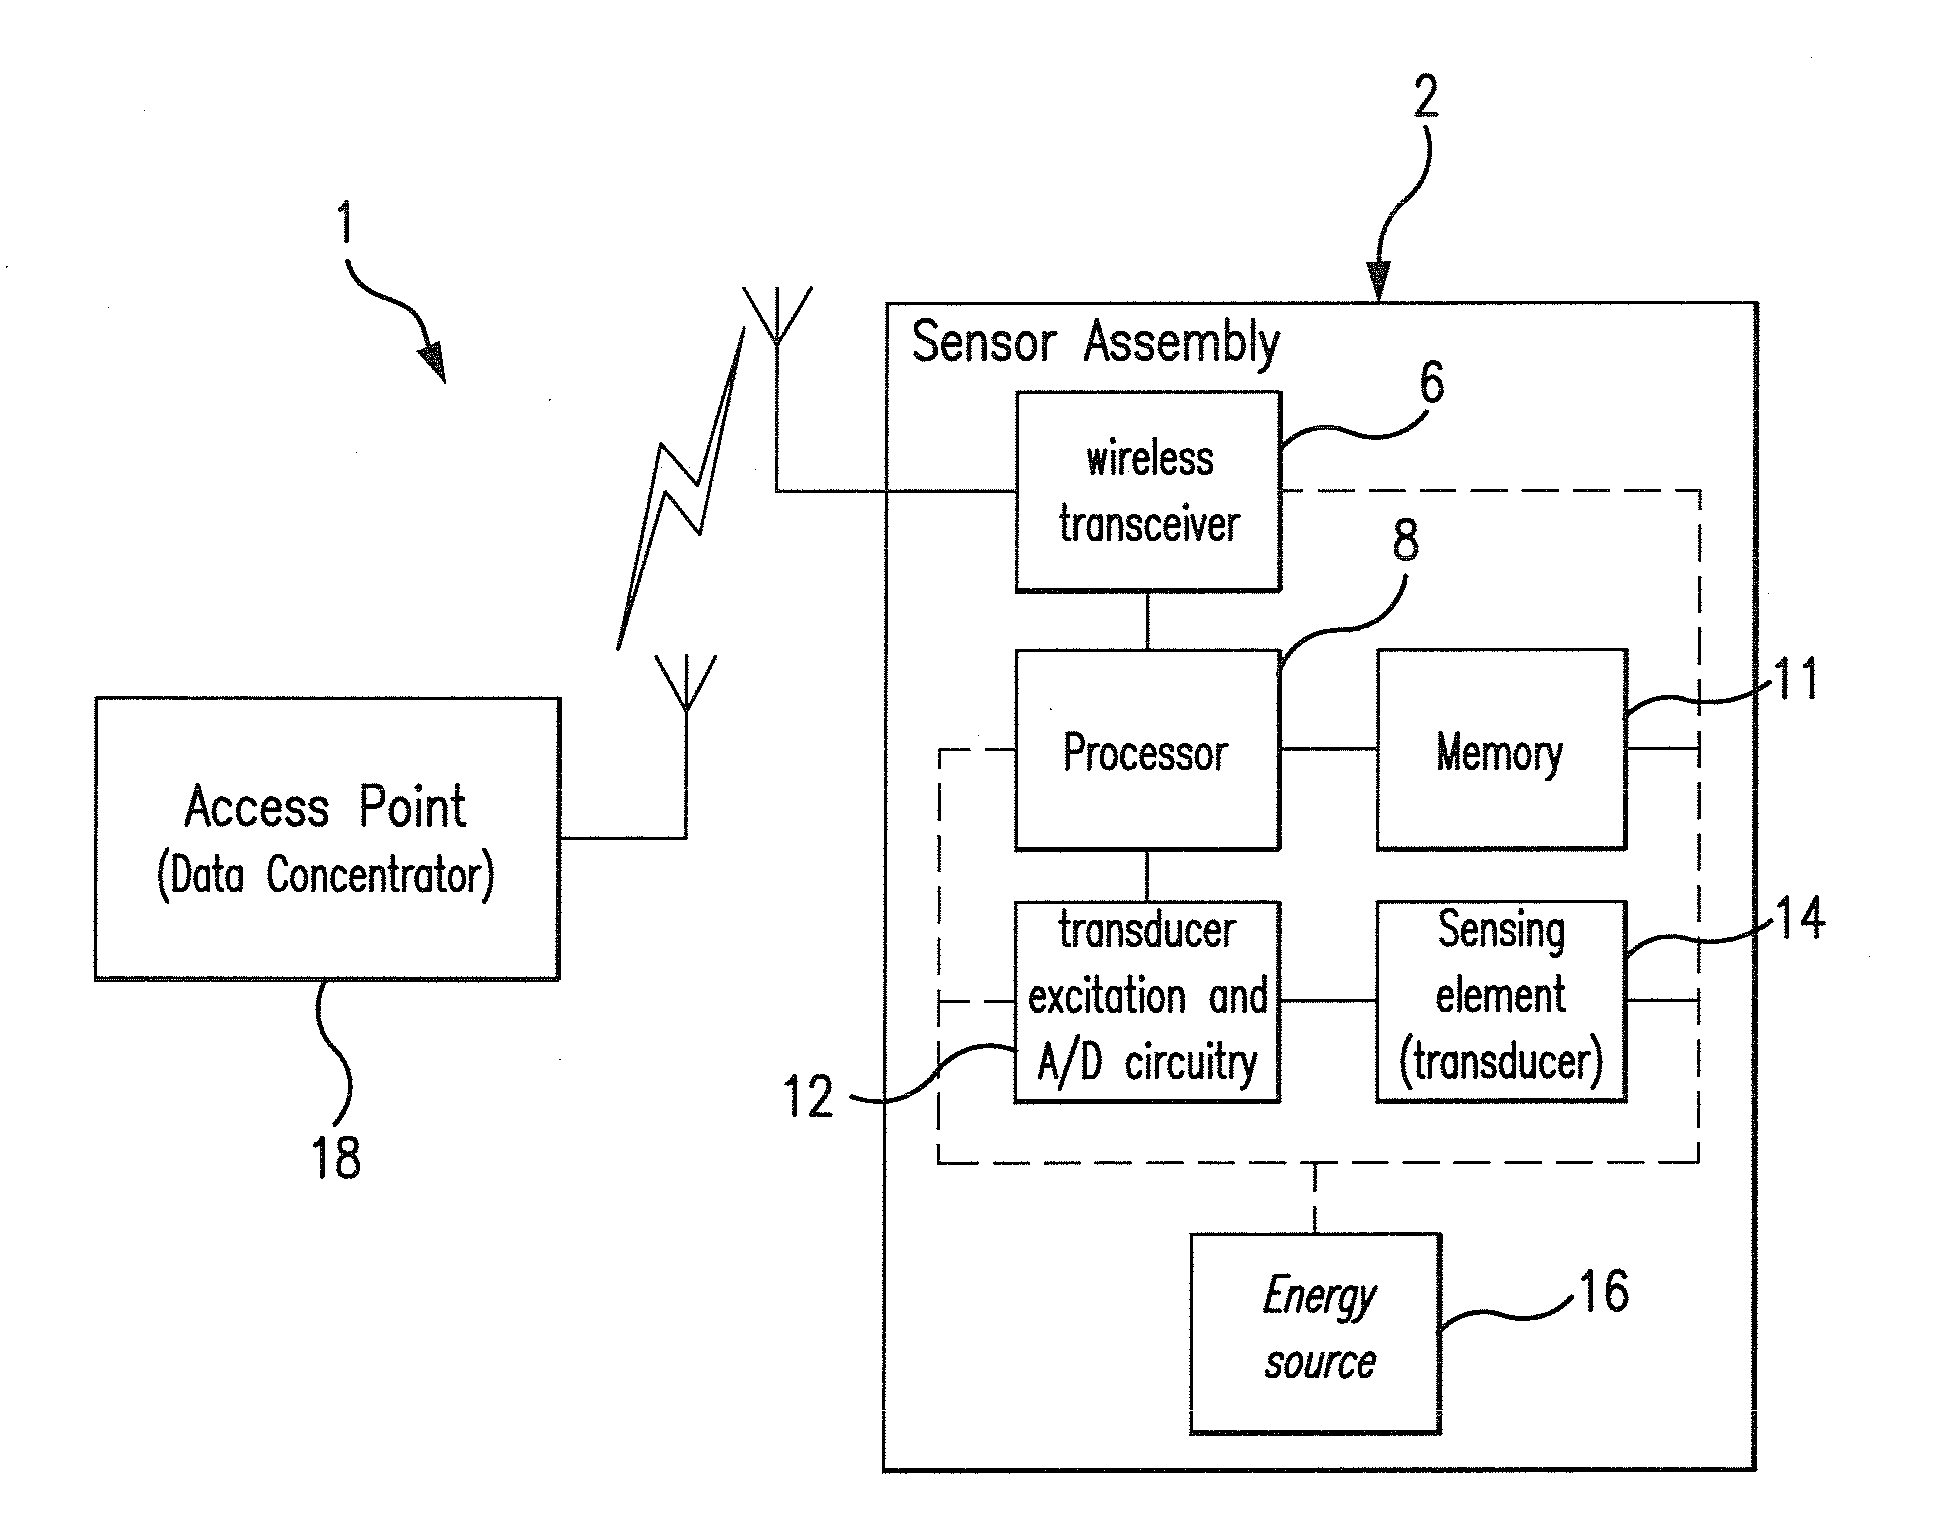 Systems and methods for energy conserving wireless sensing with situational awareness